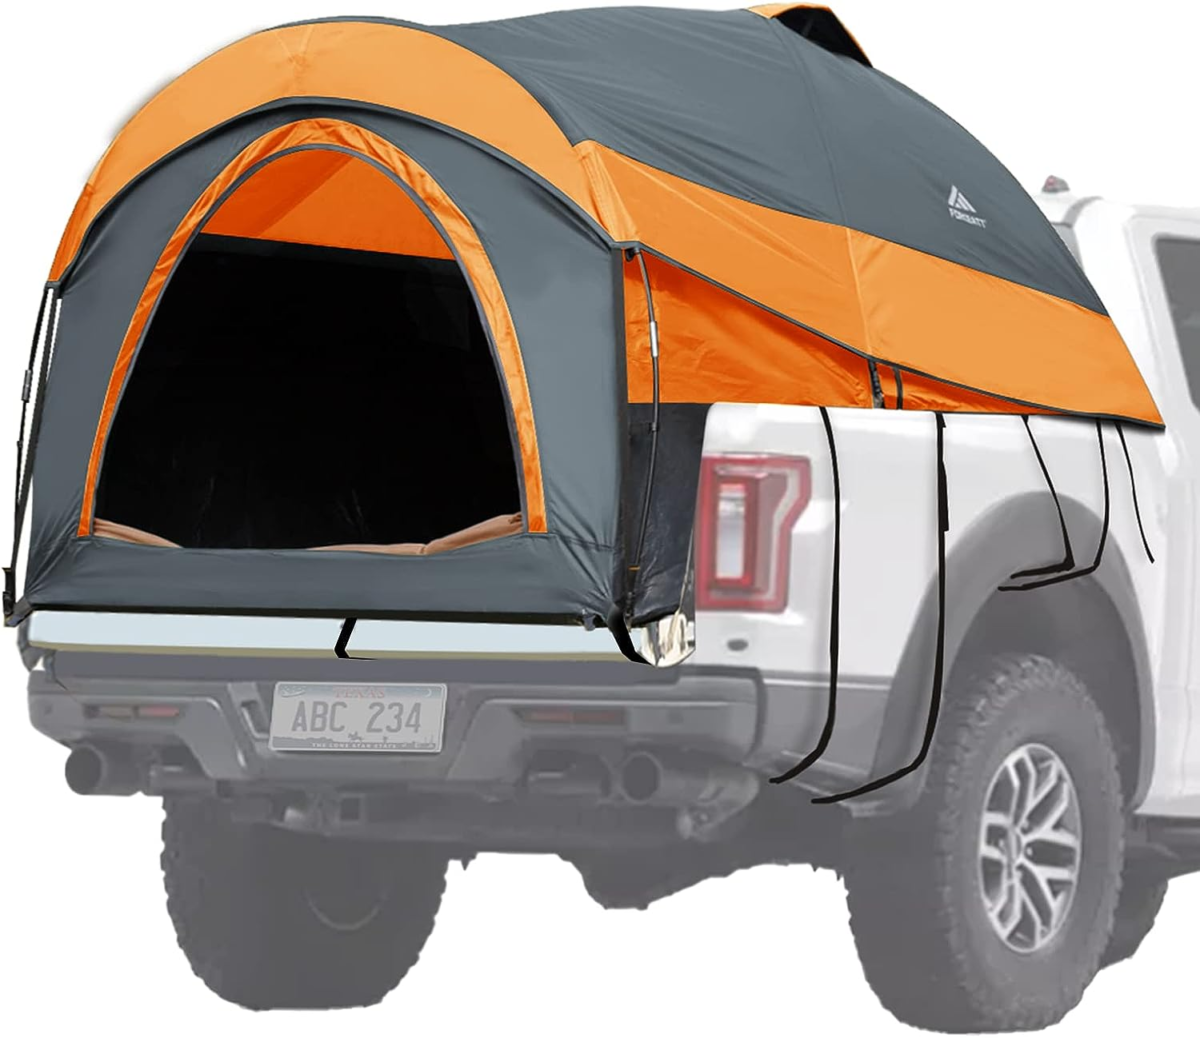 Forceatt Truck Bed Tent for camping tent on tacoma